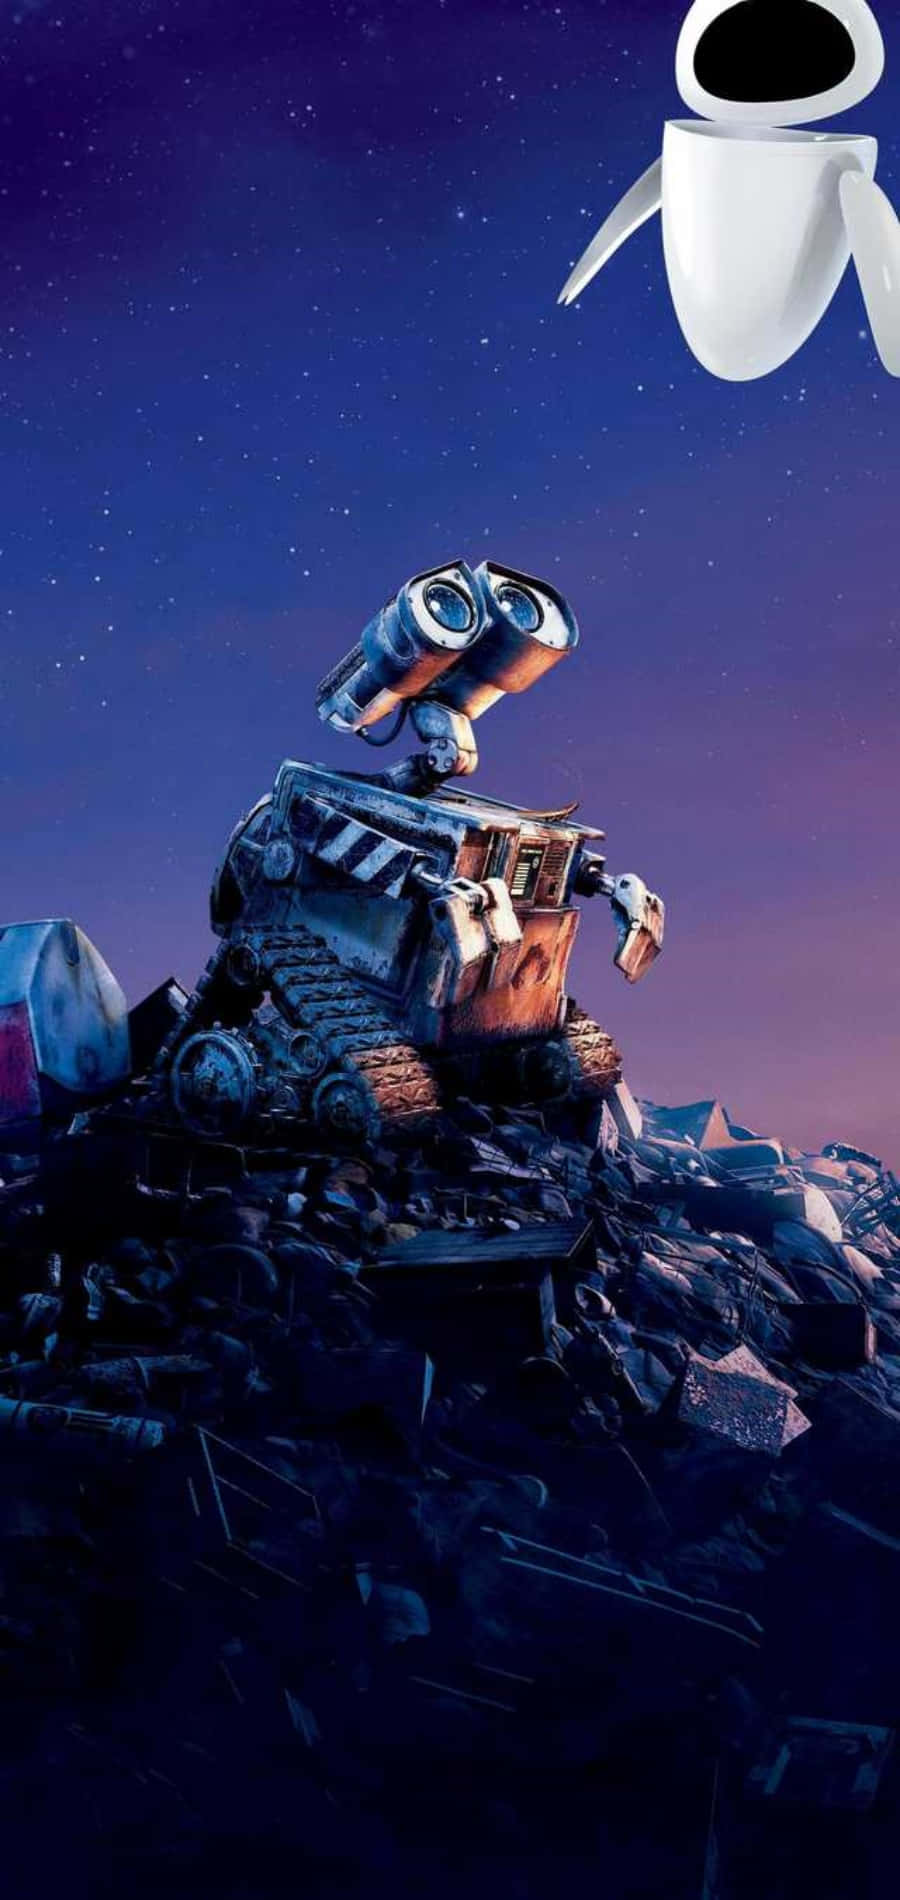 Wall E Iphone Thoughts Wallpaper